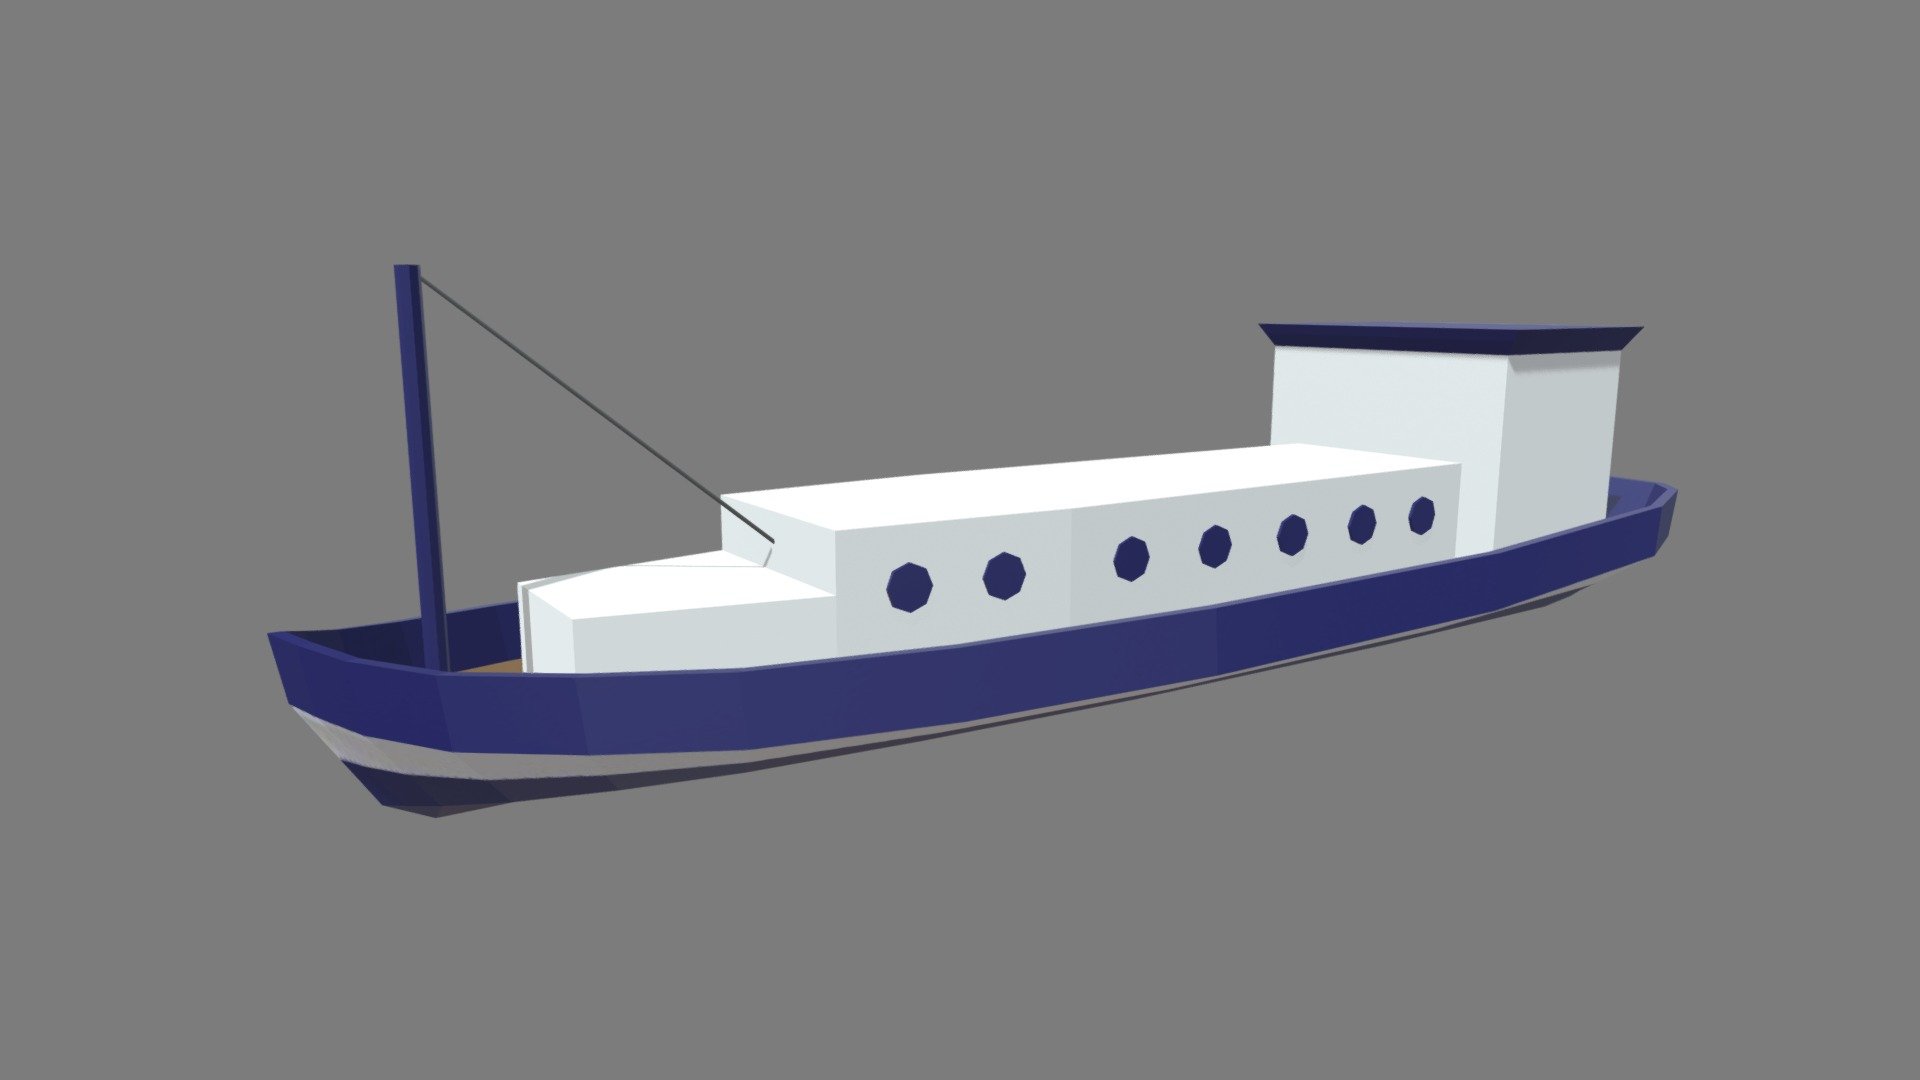 This model contains a Low Poly Boat 04 based on a boat which i modeled in Maya 2018. This model is perfect to create a new great scene with different low poly cars or low poly vehicles. I will add a low poly vehicles pack soon on my profile.

There is an automatic UV and one unique UV with a substance painter file added.

Tris: 1052 // Verts: 568

The model is ready as one unique part and ready for being a great CGI model and also a 3D printable model, i will add the STL model, tested for 3D printing in Ultimaker Cura. I uploaded the model in .mb, ,blend, .stl, .obj and .fbx. as well as the subtance painter file.

If you need any kind of help contact me, i will help you with everything i can. If you like the model please give me some feedback, I would appreciate it.

Don’t doubt on contacting me, i would be very happy to help. If you experience any kind of difficulties, be sure to contact me and i will help you. Sincerely Yours, ViperJr3D - Low Poly Boat 04 - Buy Royalty Free 3D model by ViperJr3D 3d model